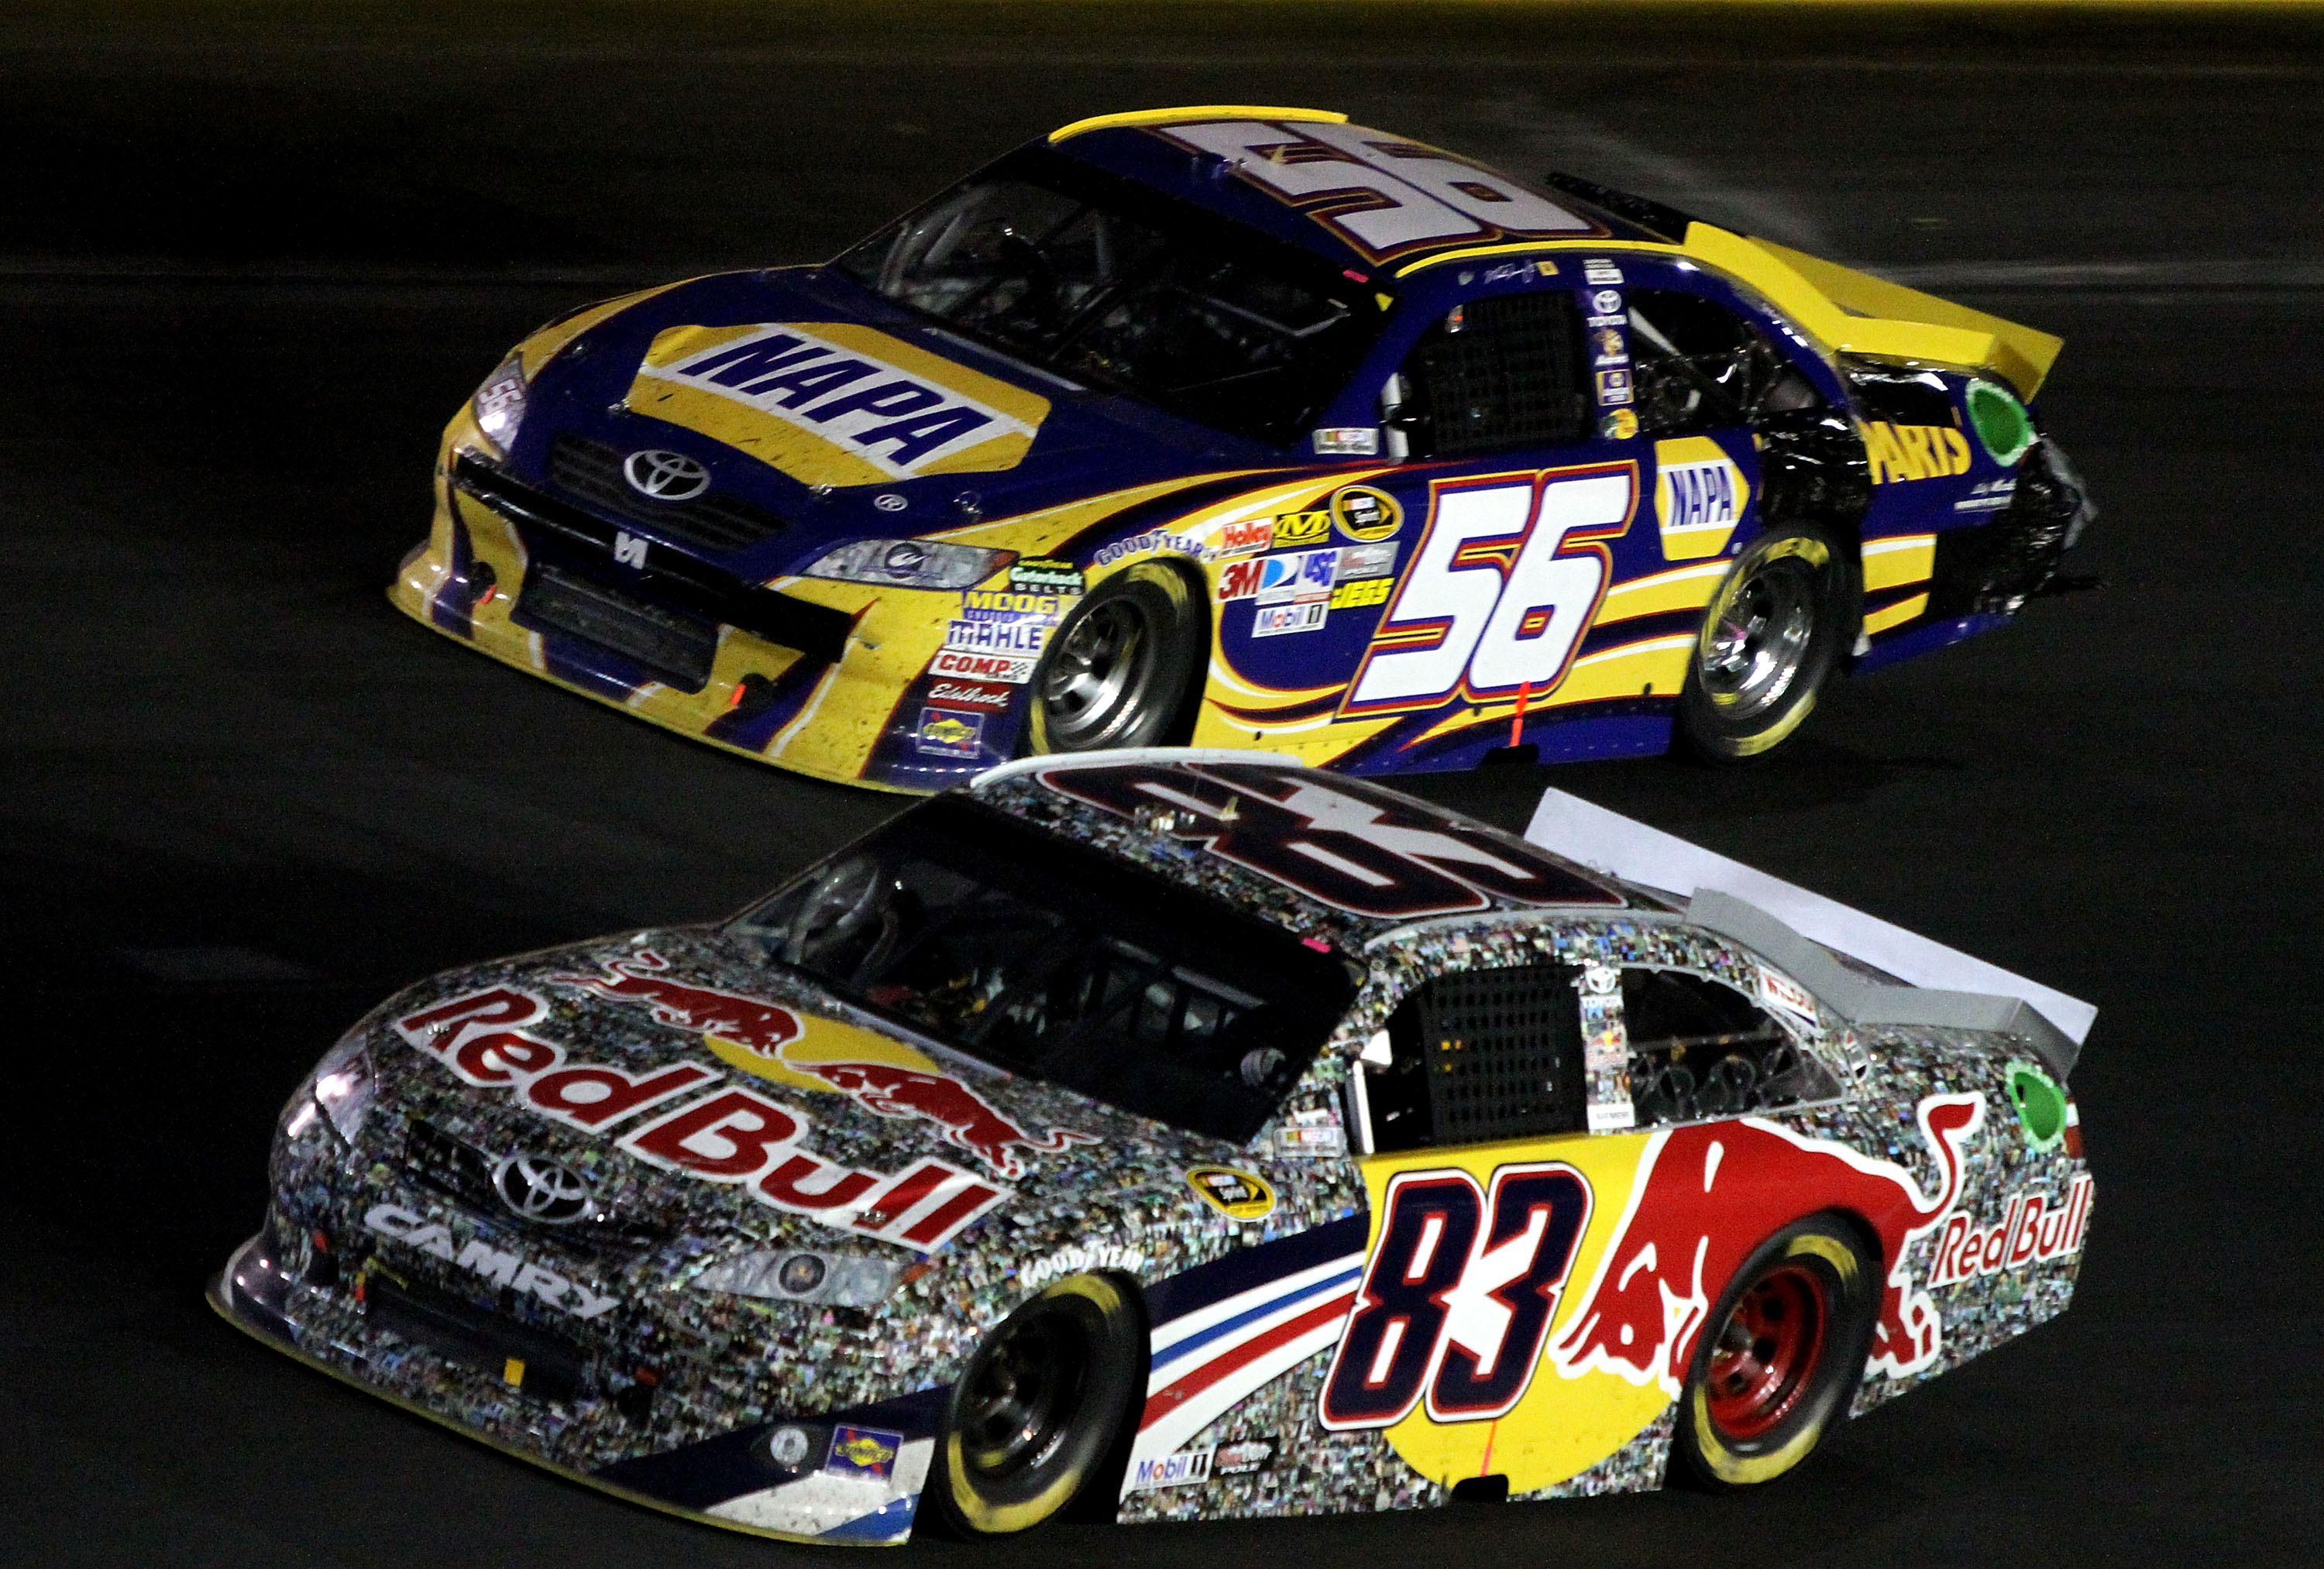 CONCORD, NC - MAY 29:  Brian Vickers, driver of the #83 Red Bull Toyota, races side by side with Martin Truex Jr., driver of the #56 NAPA Auto Parts Toyota, during the NASCAR Sprint Cup Series Coca-Cola 600 at Charlotte Motor Speedway on May 29, 2011 in C